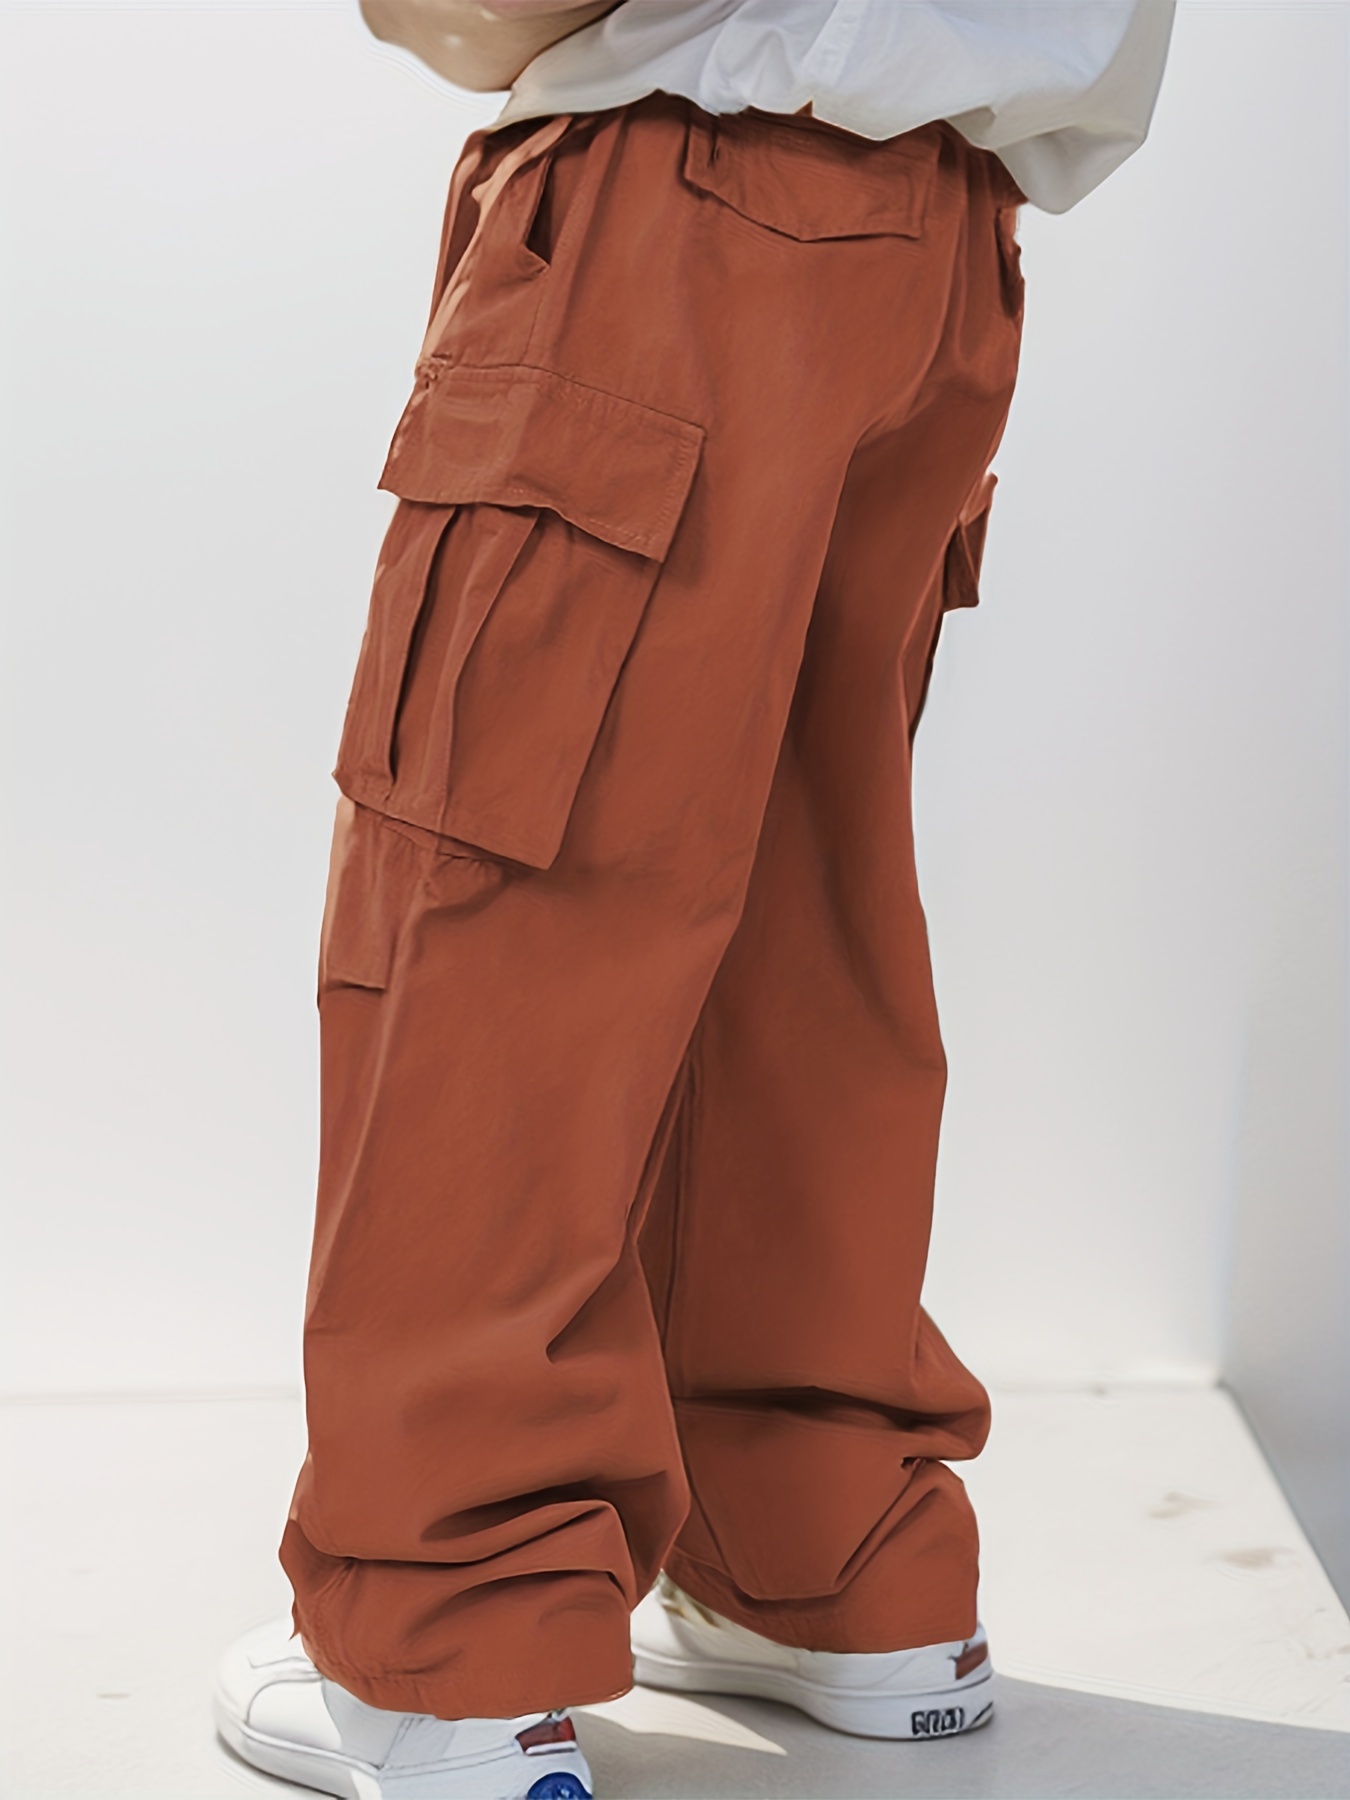 Cargo Pants for Men Relaxed Fit with Pockets Straight Leg Cargo